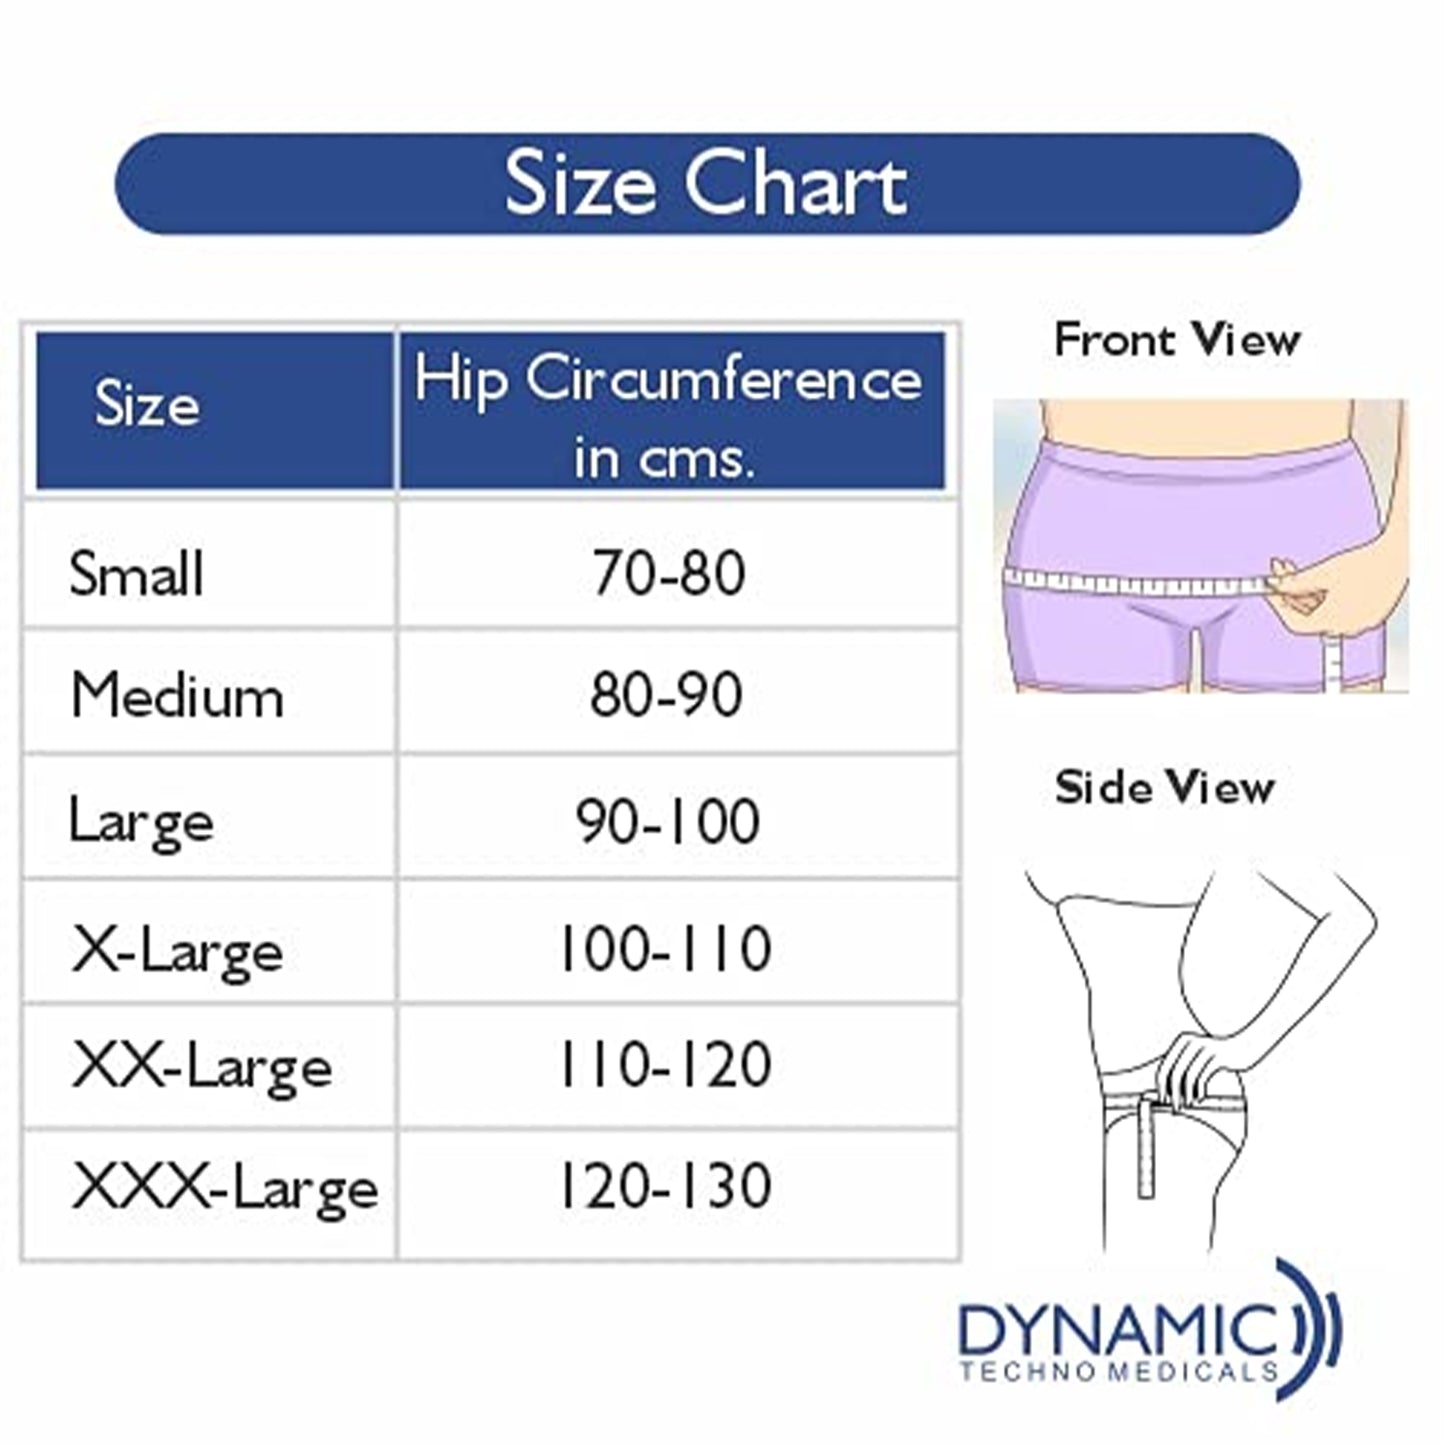 Dyna Surgical Abdominal Corset 100-110 Cms - XLarge